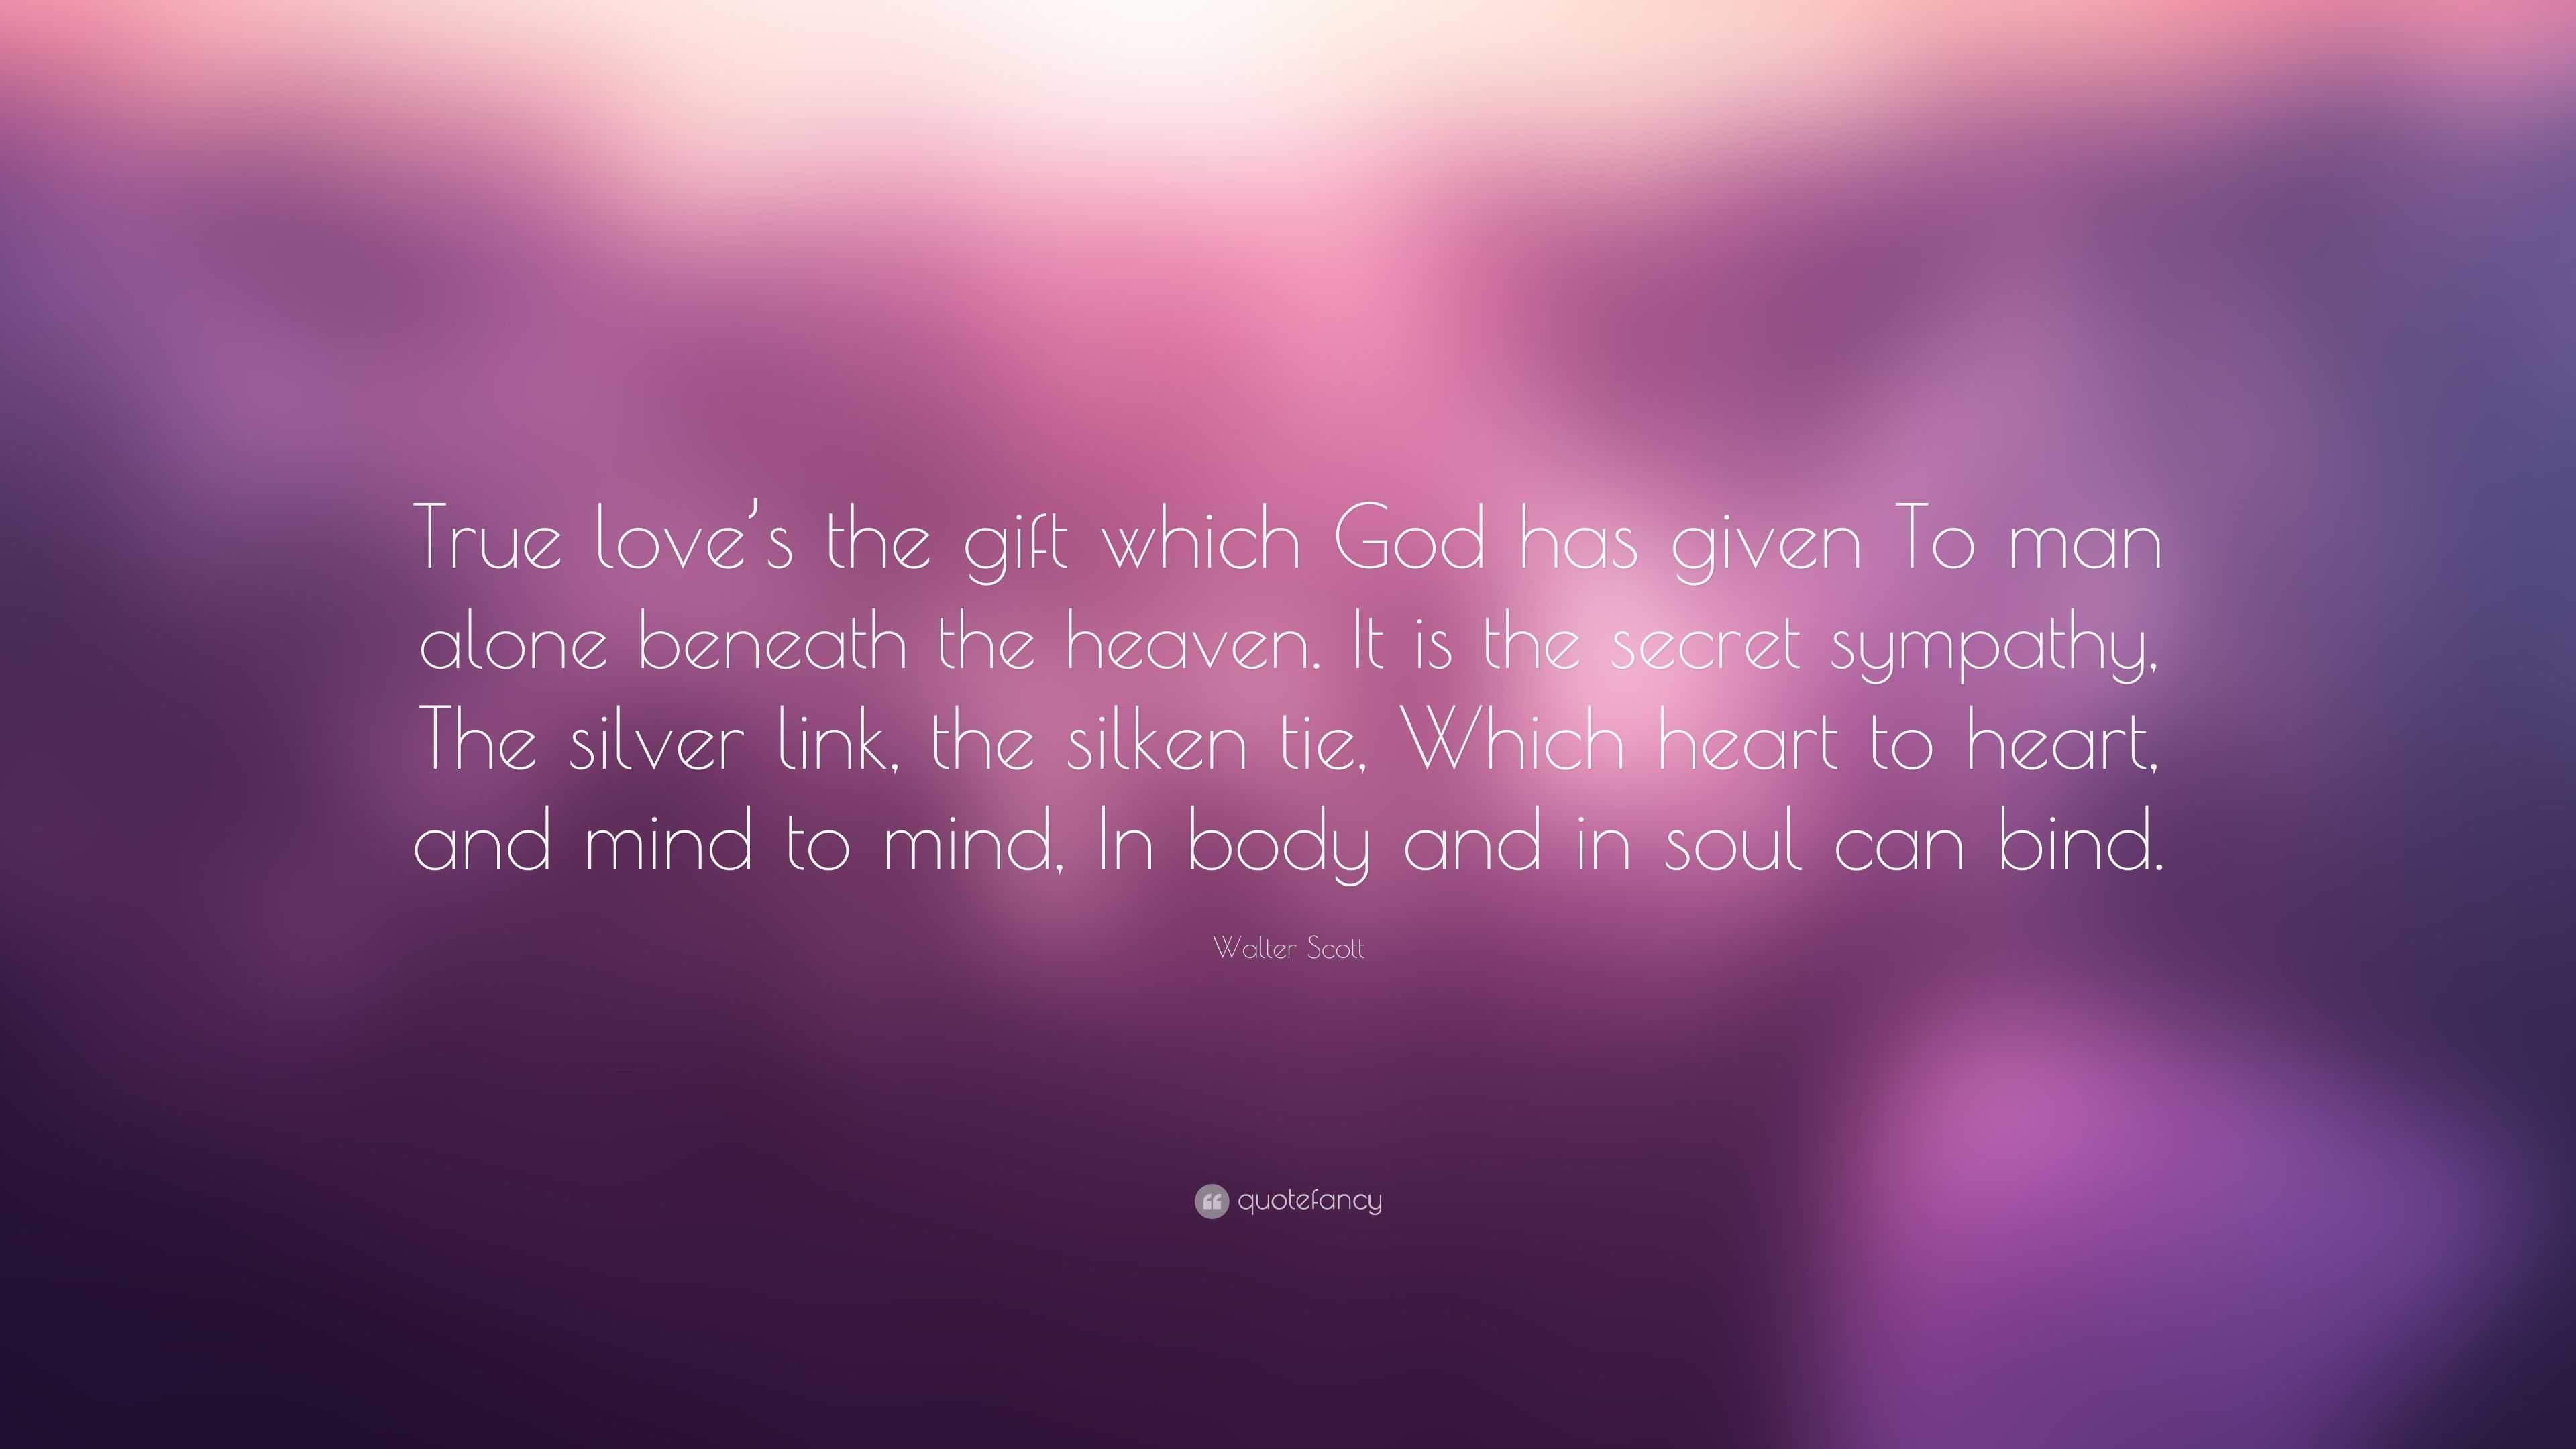 Walter Scott Quote “True love s the t which God has given To man alone